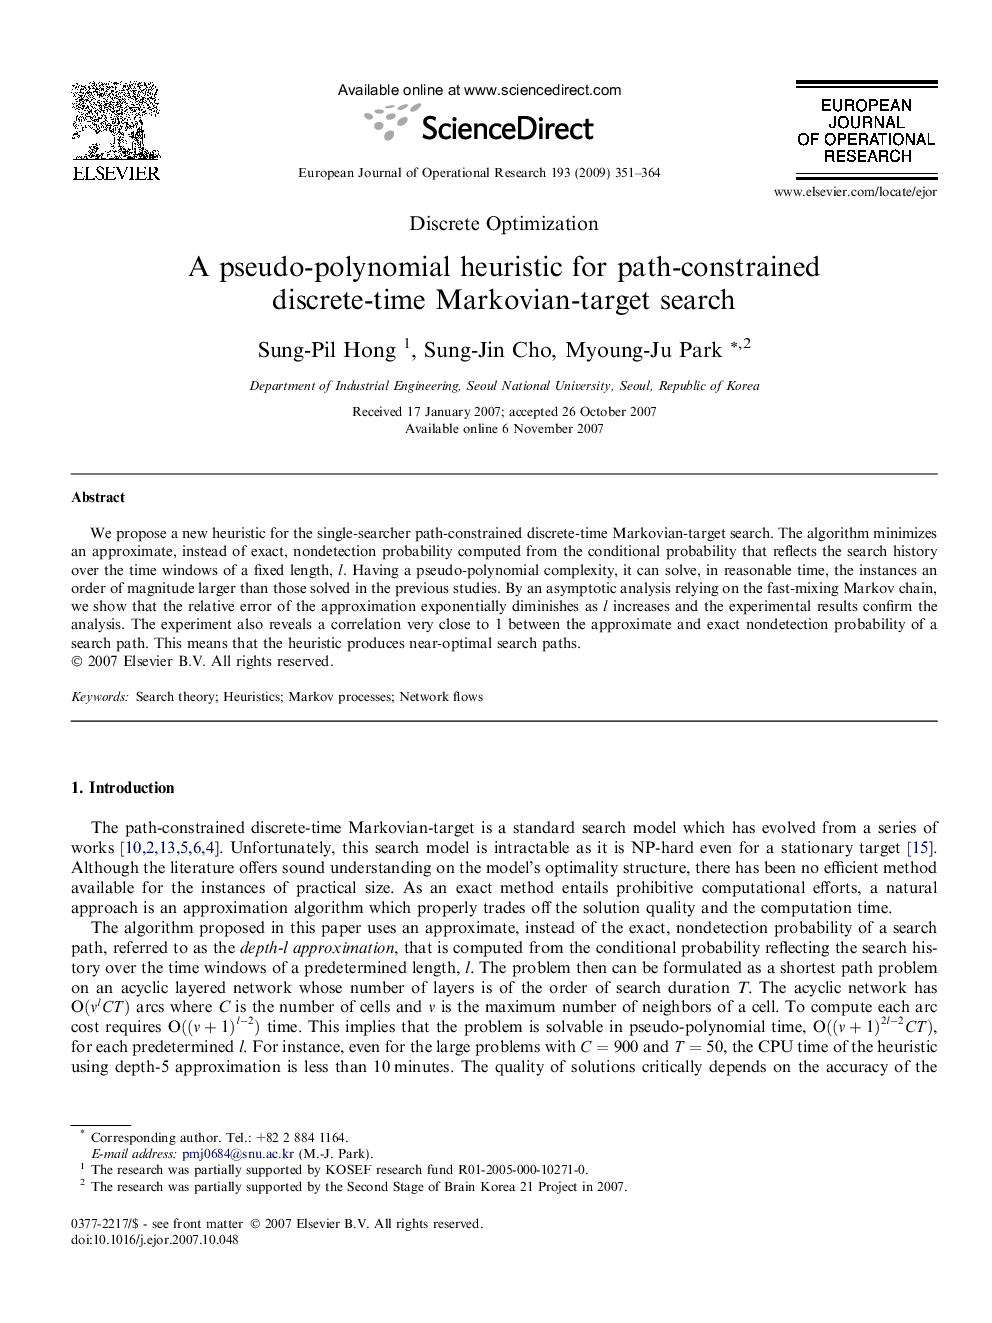 A pseudo-polynomial heuristic for path-constrained discrete-time Markovian-target search